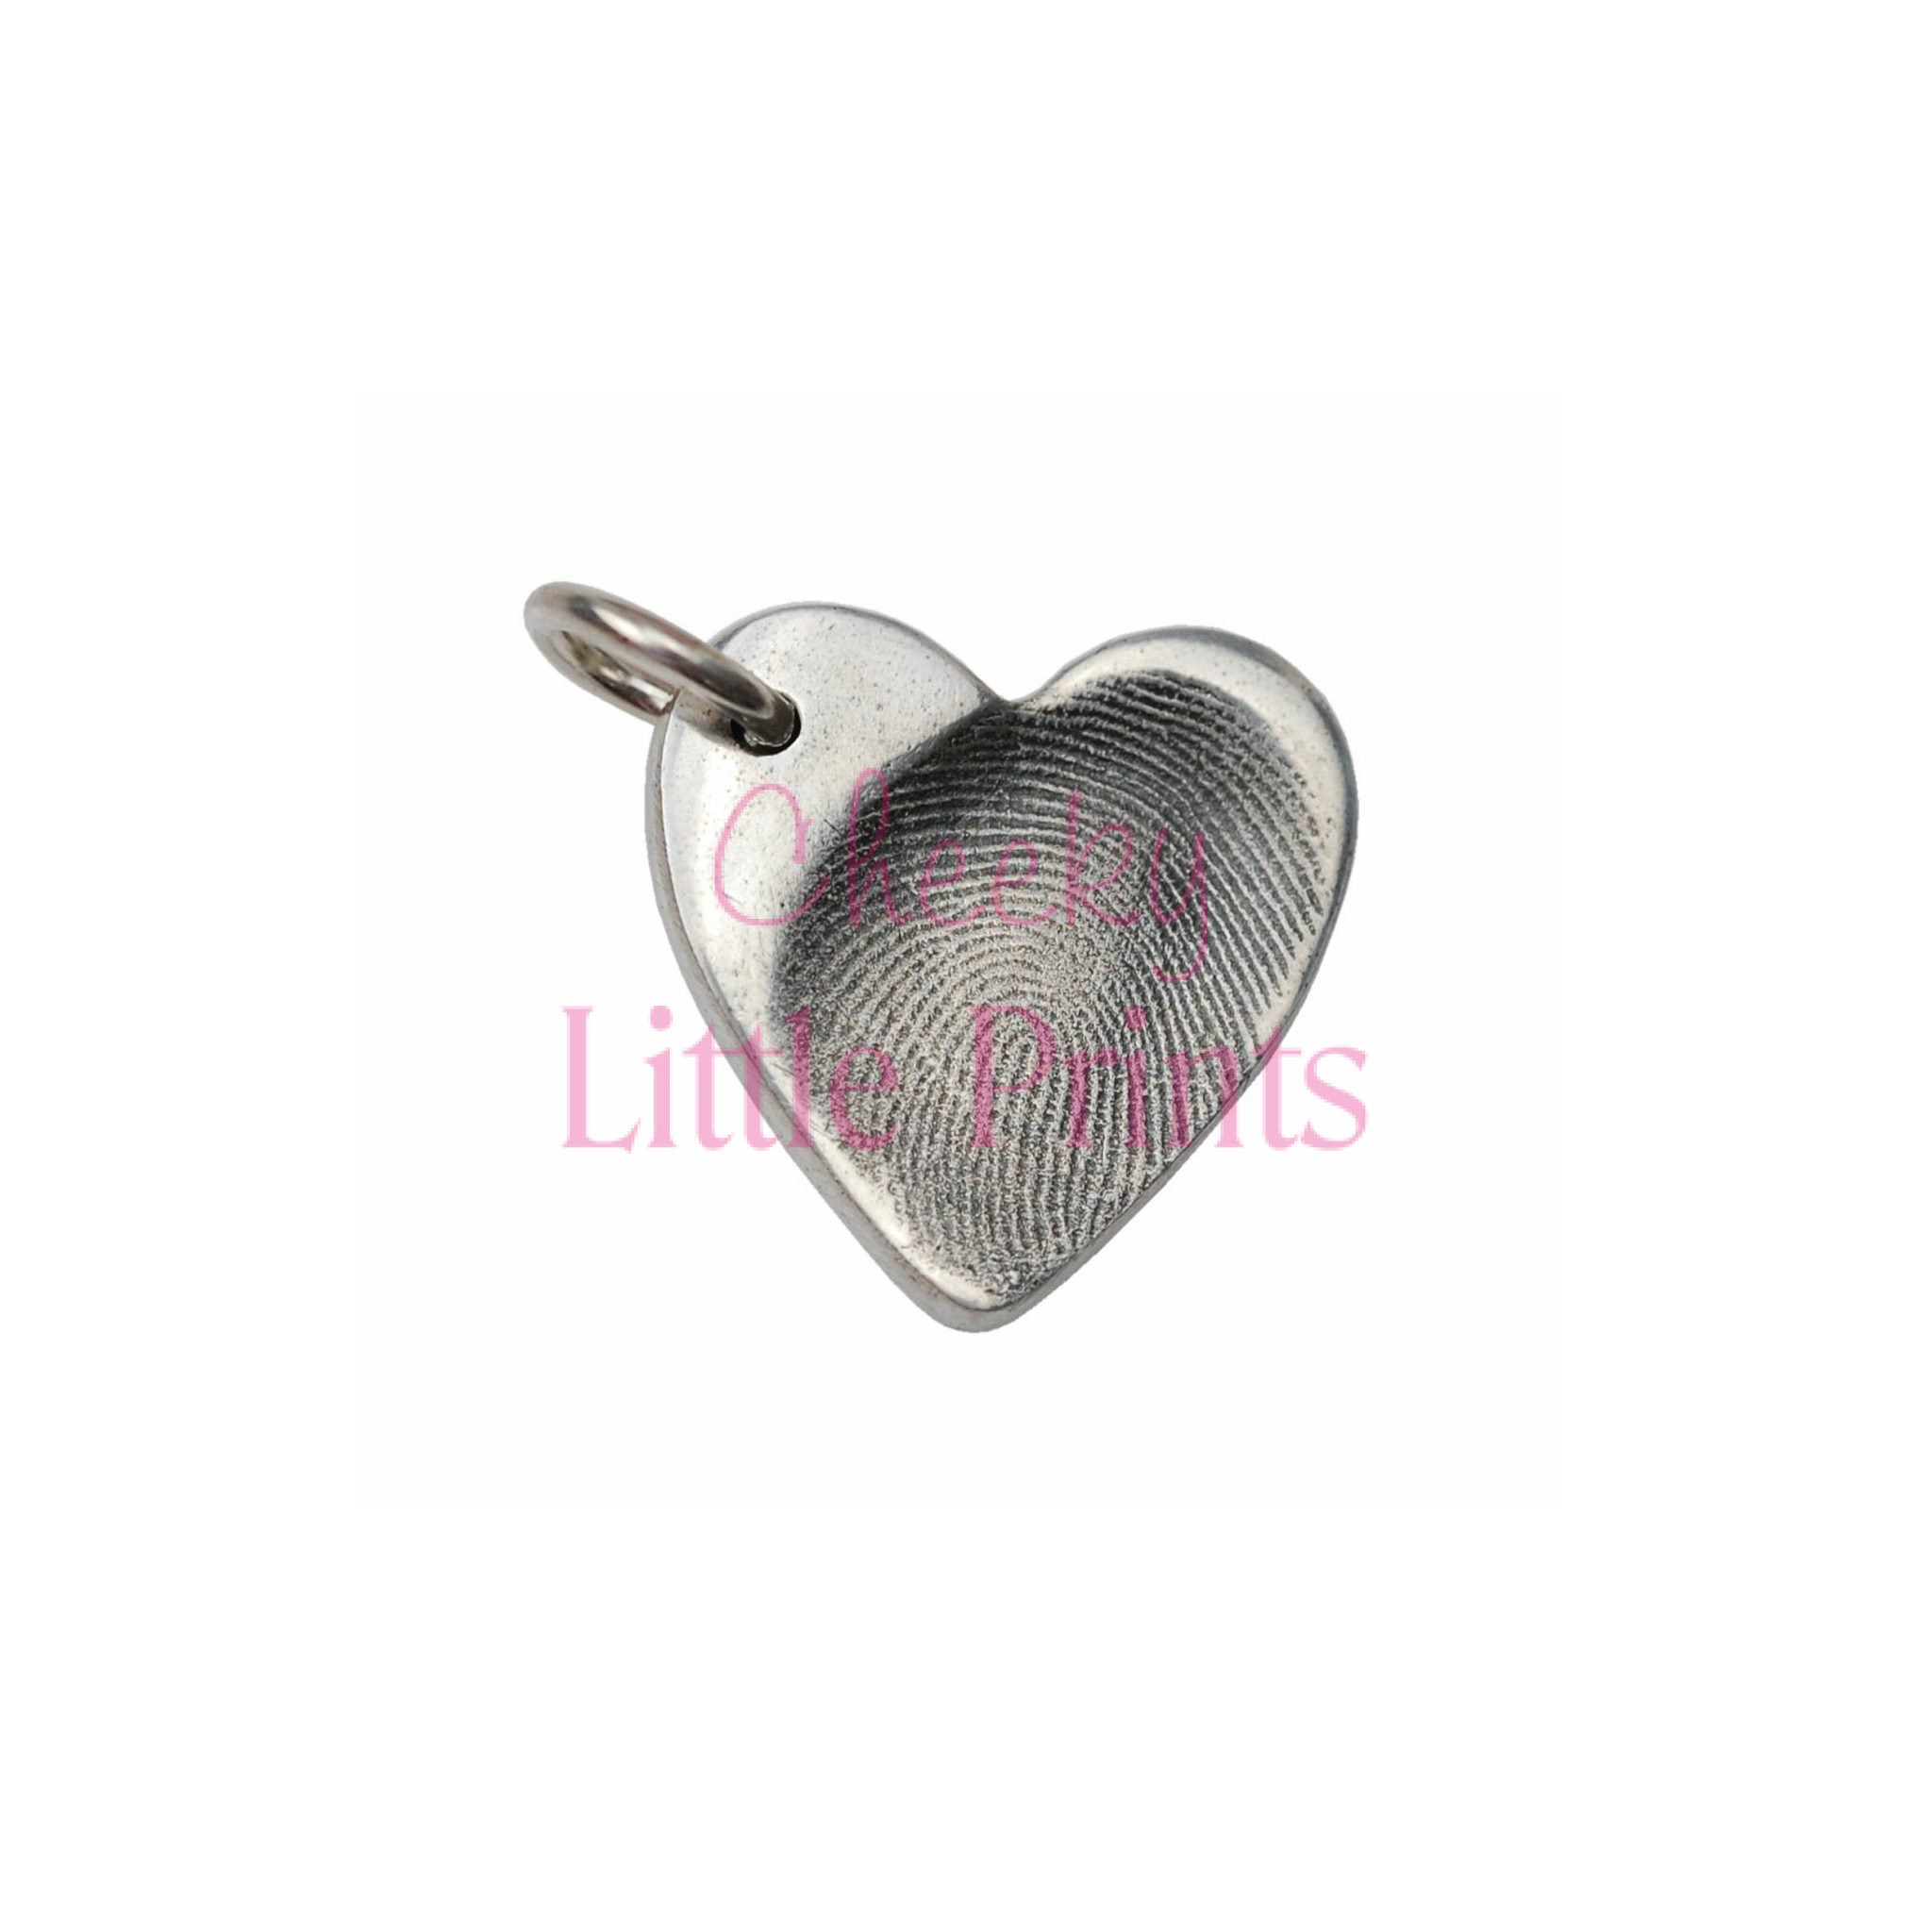 Small silver heart with fingerprint